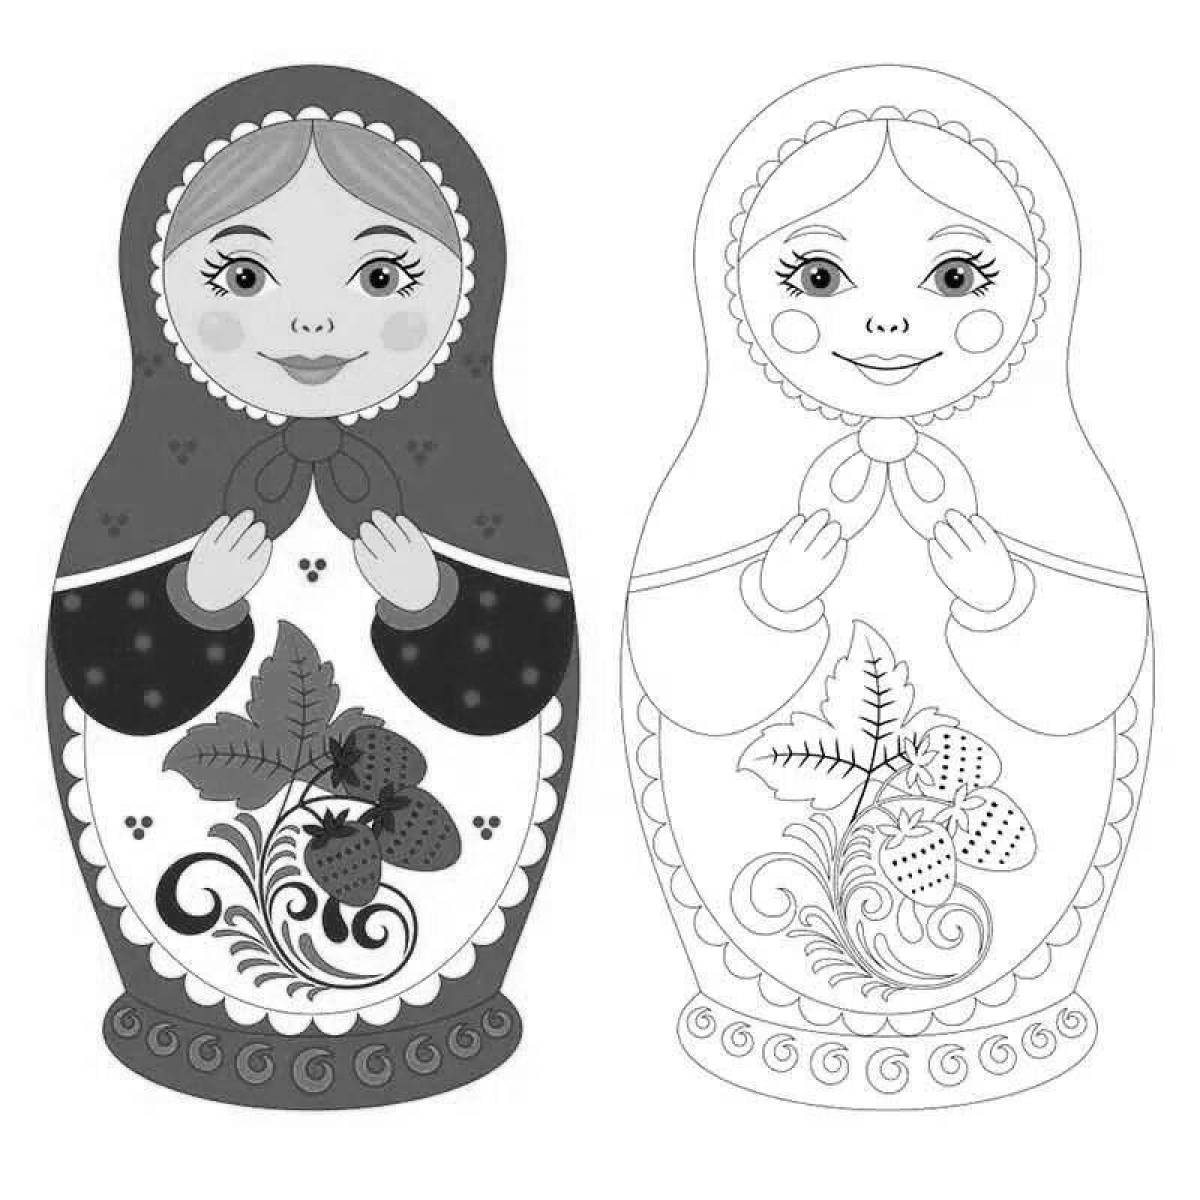 Exquisite nesting doll in the middle group